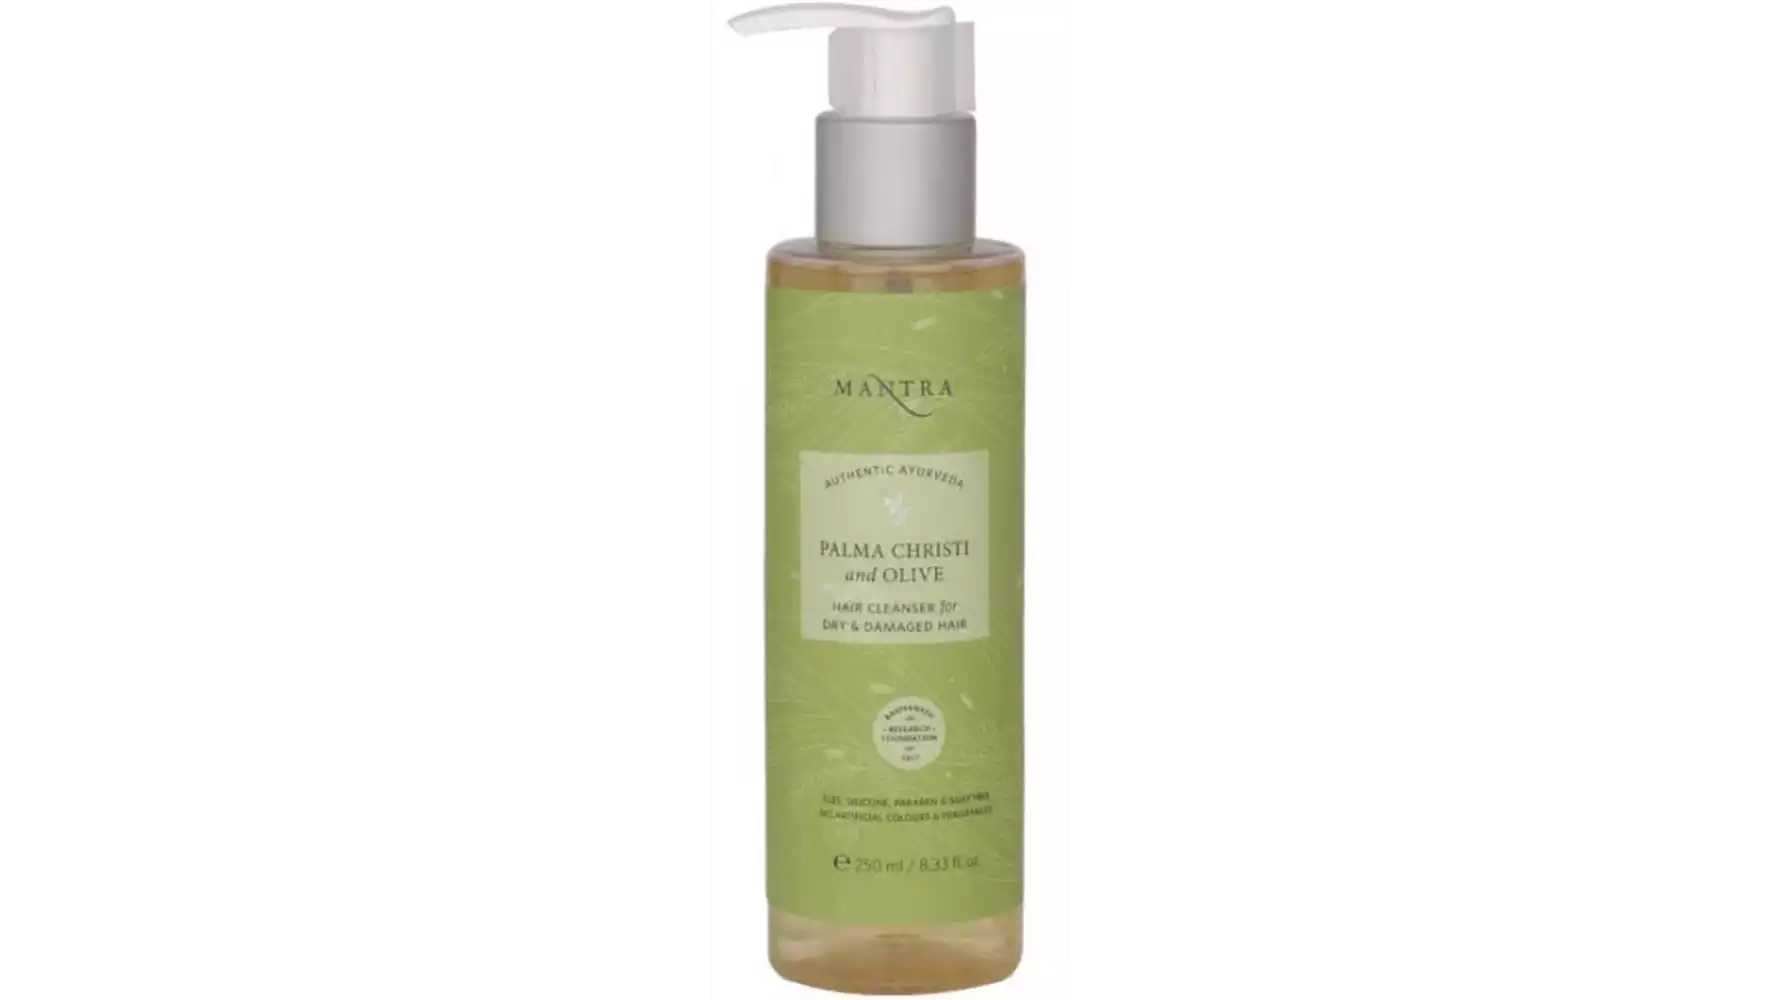 Mantra Herbal Palam Christi And Olive Hair Cleanser Dry & Damage Hair (250ml)